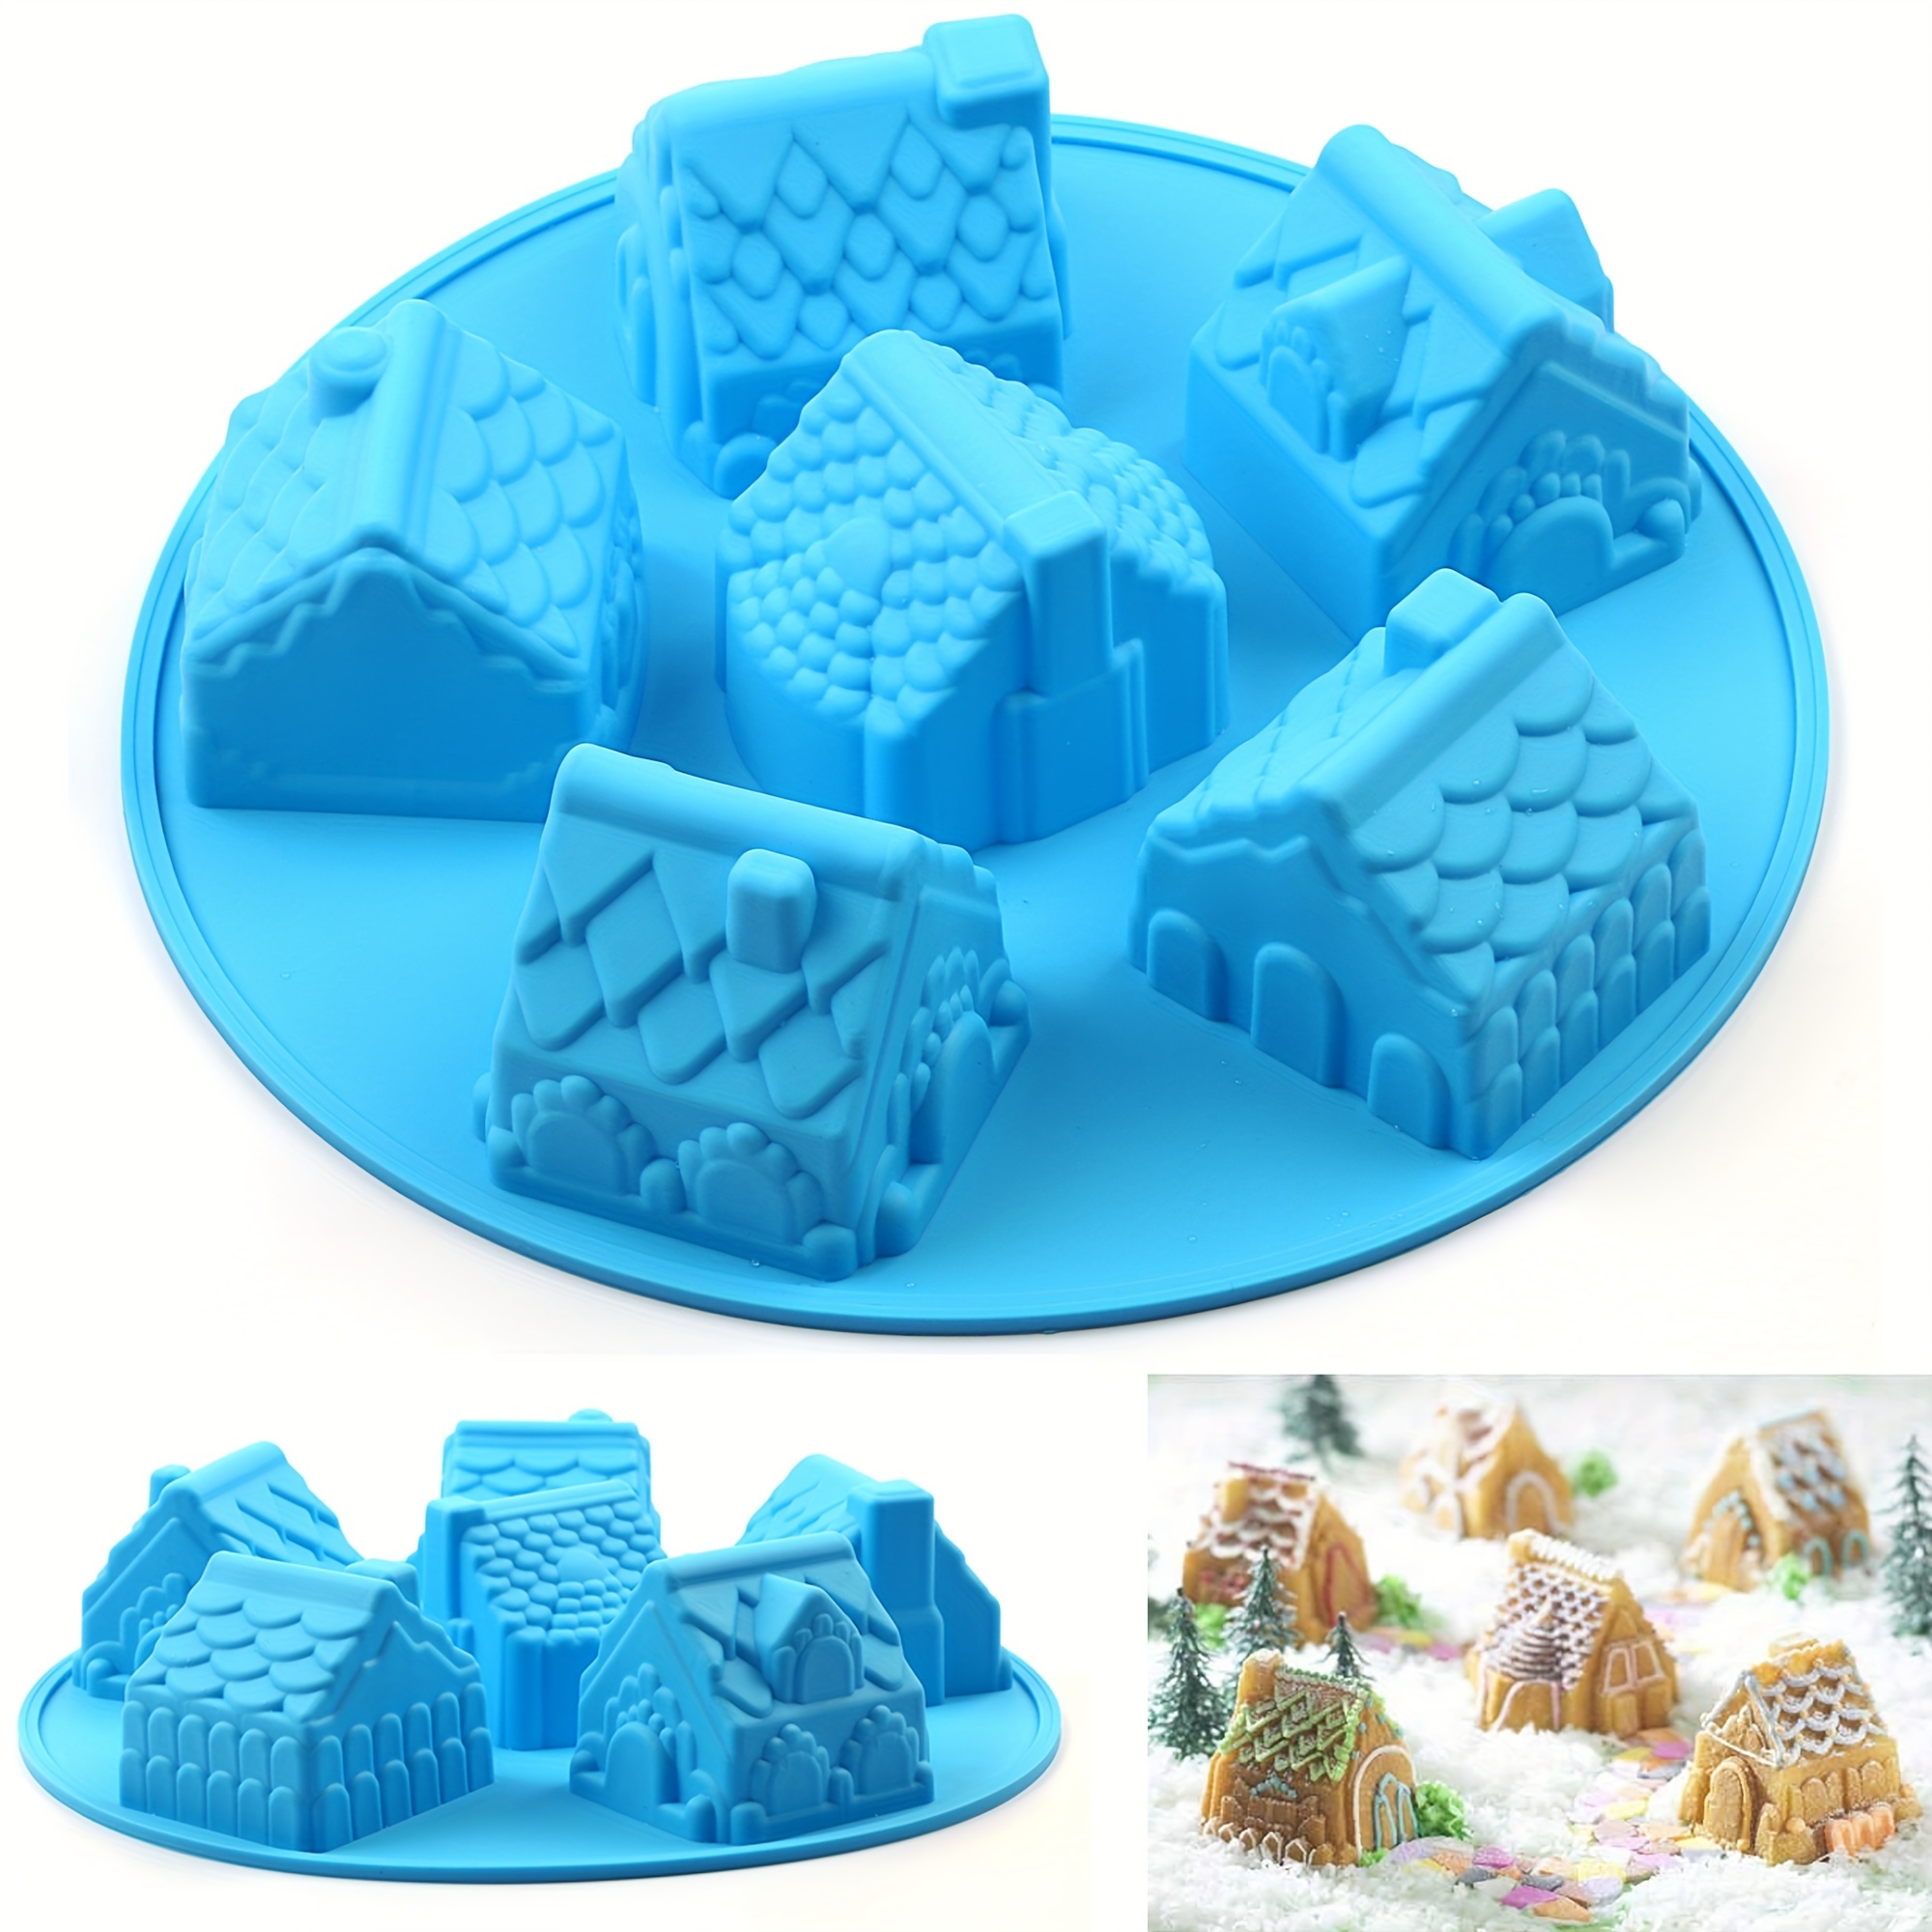 1pc, Christmas Gingerbread House Cake Mold, Silicone Mould 6 Cavity House  Shape Baking Mold For DIY Making Cake, Candy, Chocolate, Candles, Soap, Chri